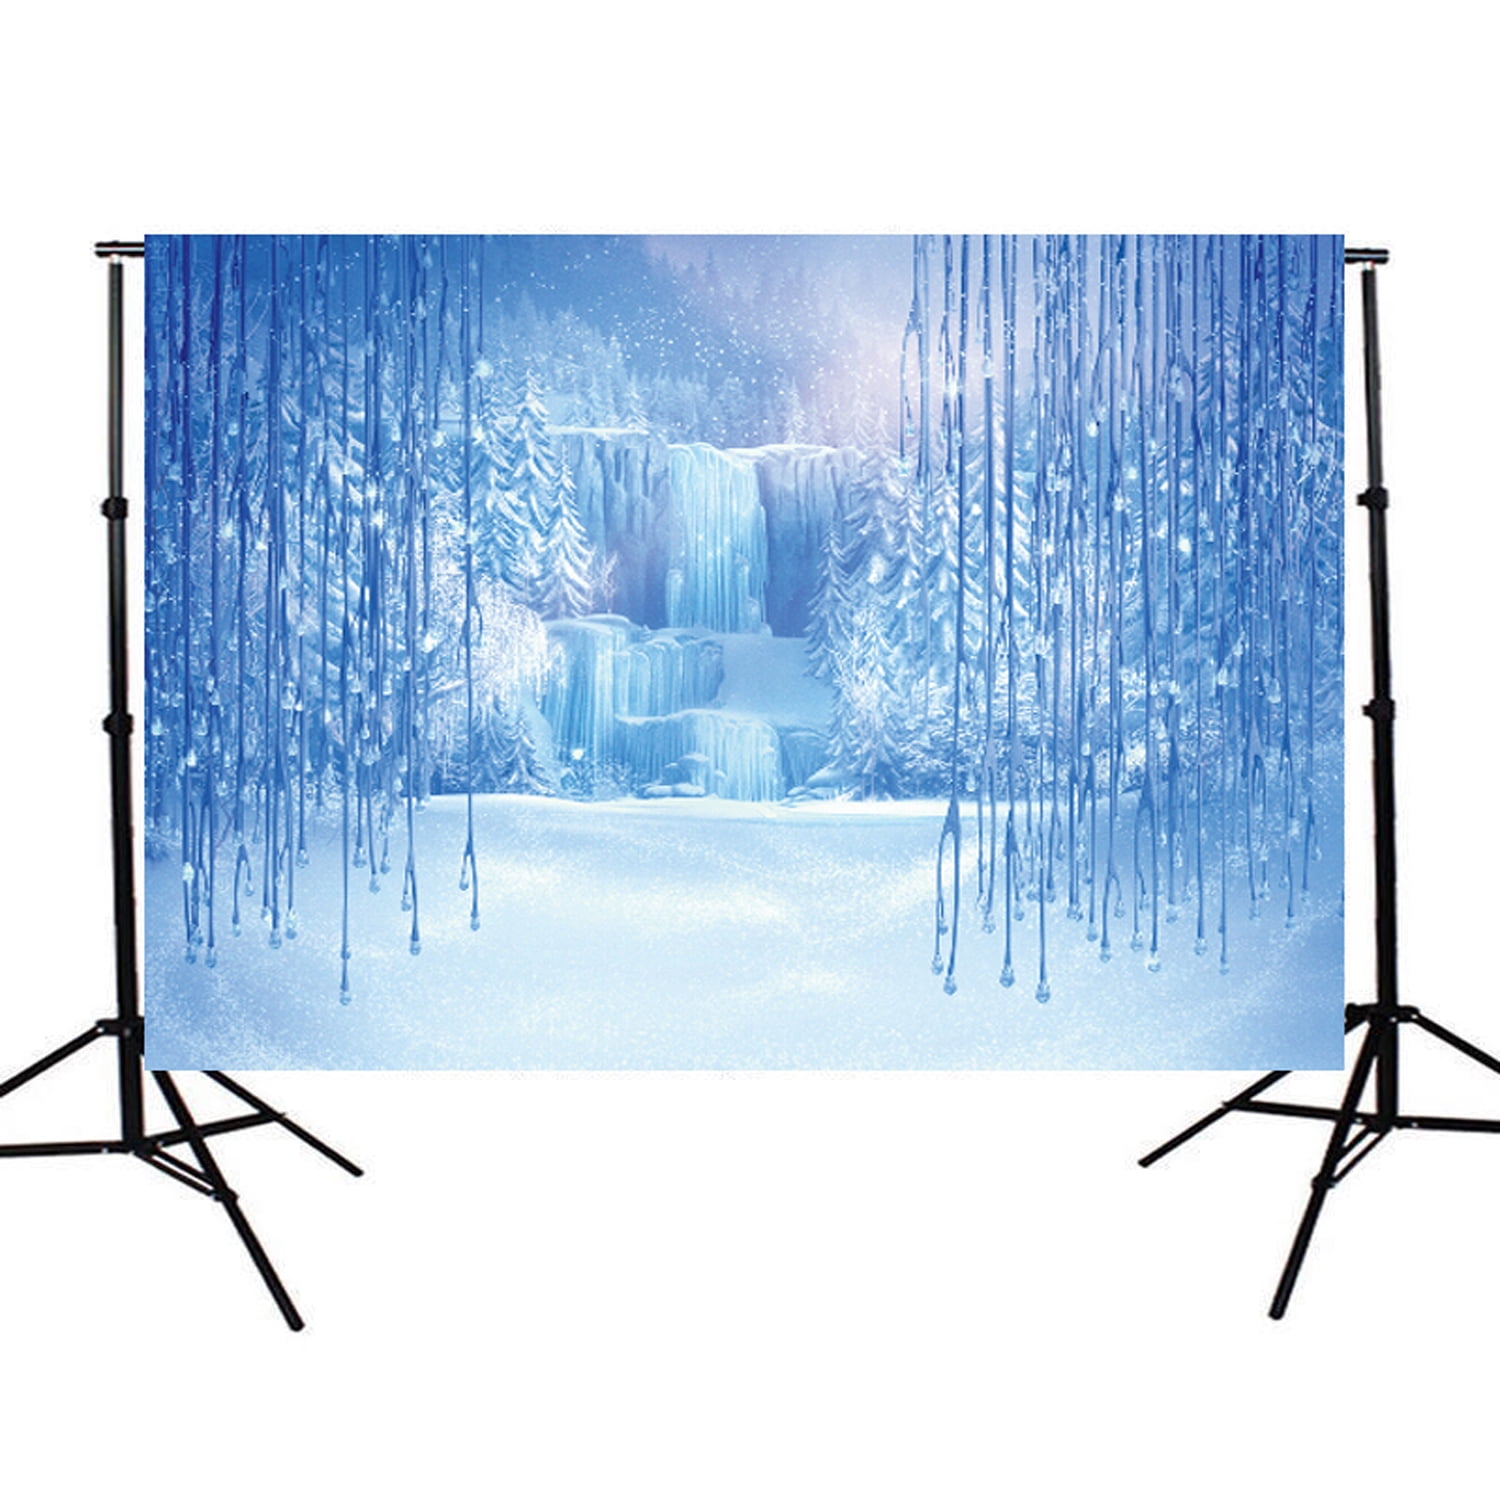 6x4ft Vinyl Blue ice Crystals Background Living Room Outdoor Decoration Backgrounds Tapestries Party Birthday Present Photography Backdrop Photo Studio LYLS1146 for Party Decoration Birthday YouTube V